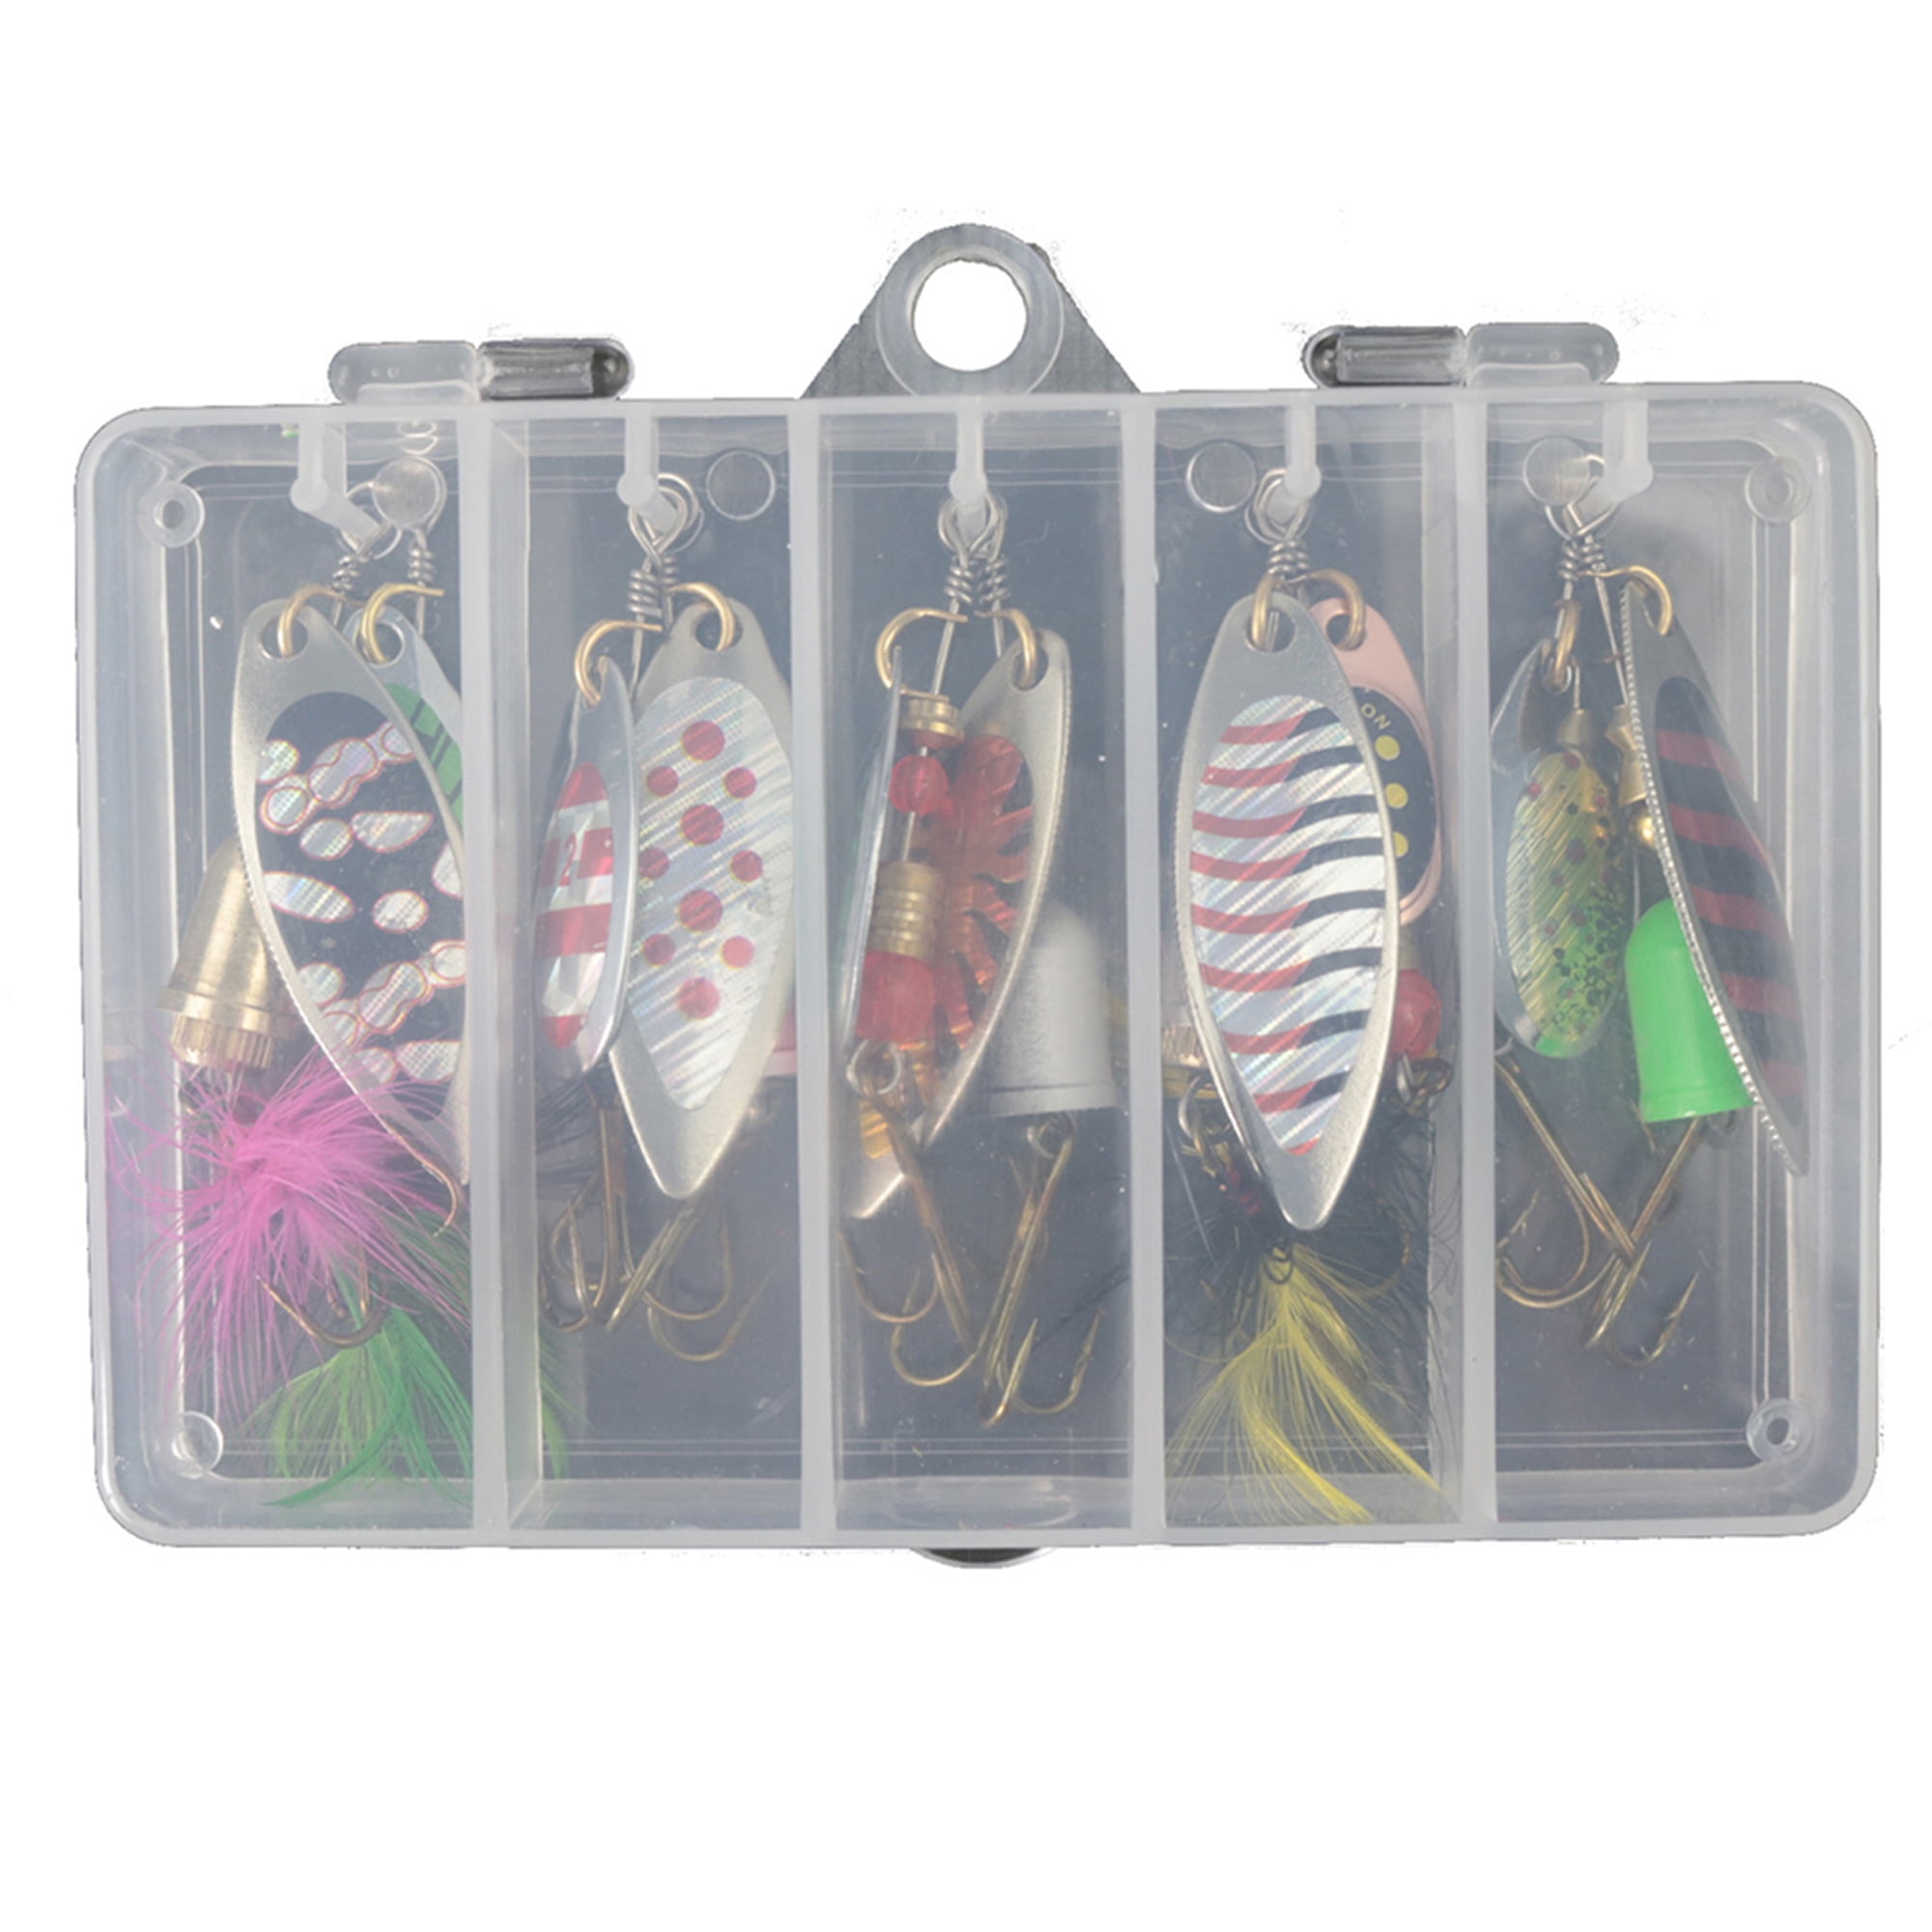 Dropship 30Pcs Fishing Lures Kit Metal Spoon Lures Hard Spinner Baits With  Single Triple Hook For Trout Bass Salmon With Free Tackle Box to Sell  Online at a Lower Price